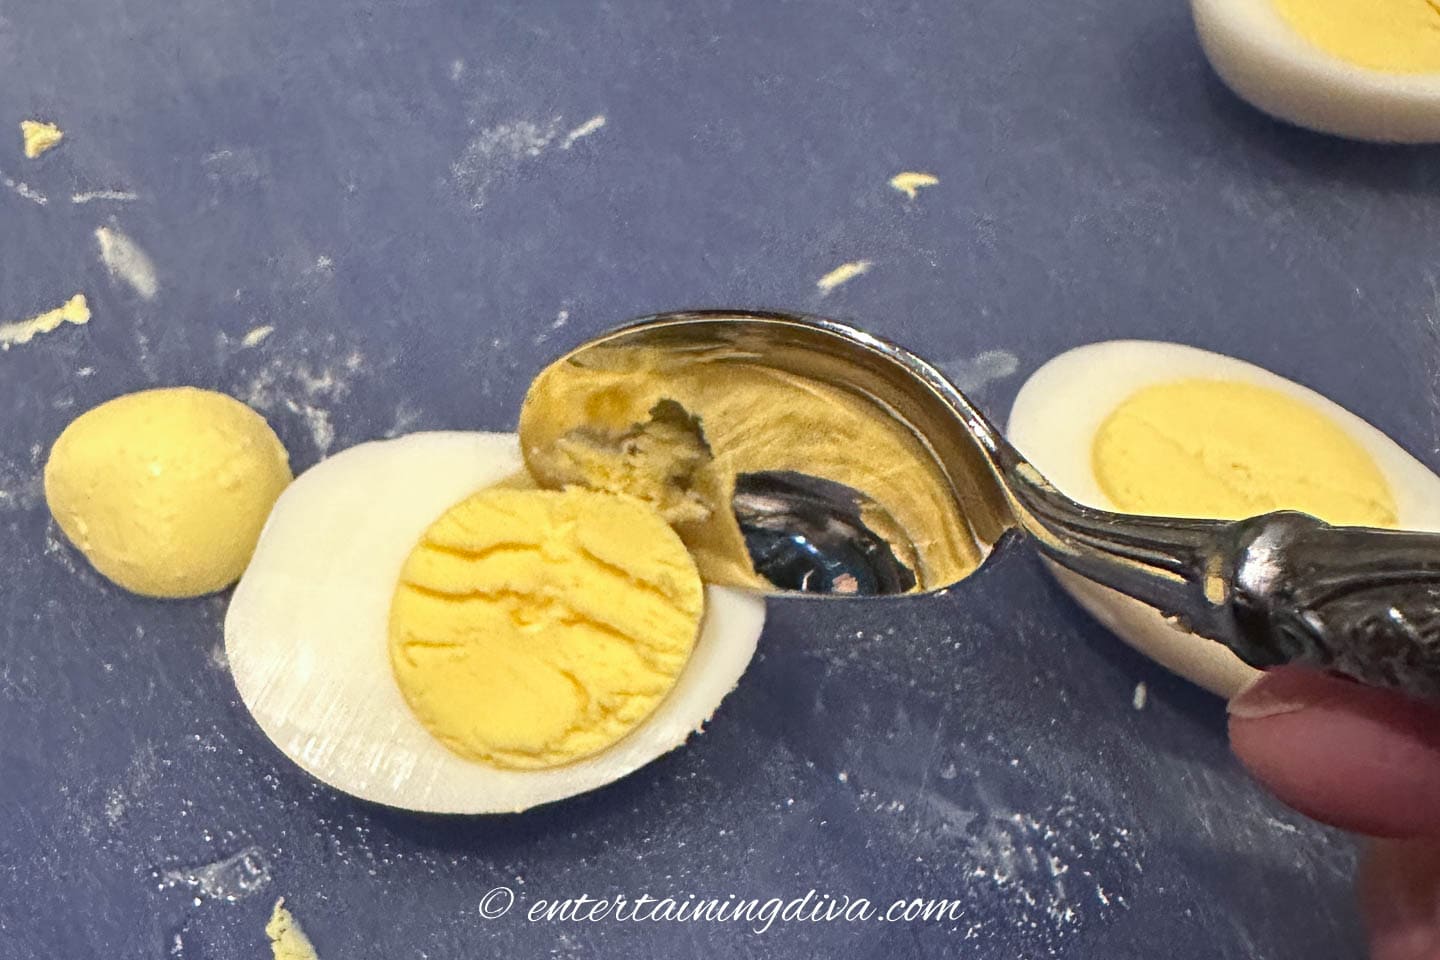 Yolk being scooped out of a hard boiled egg with a spoon